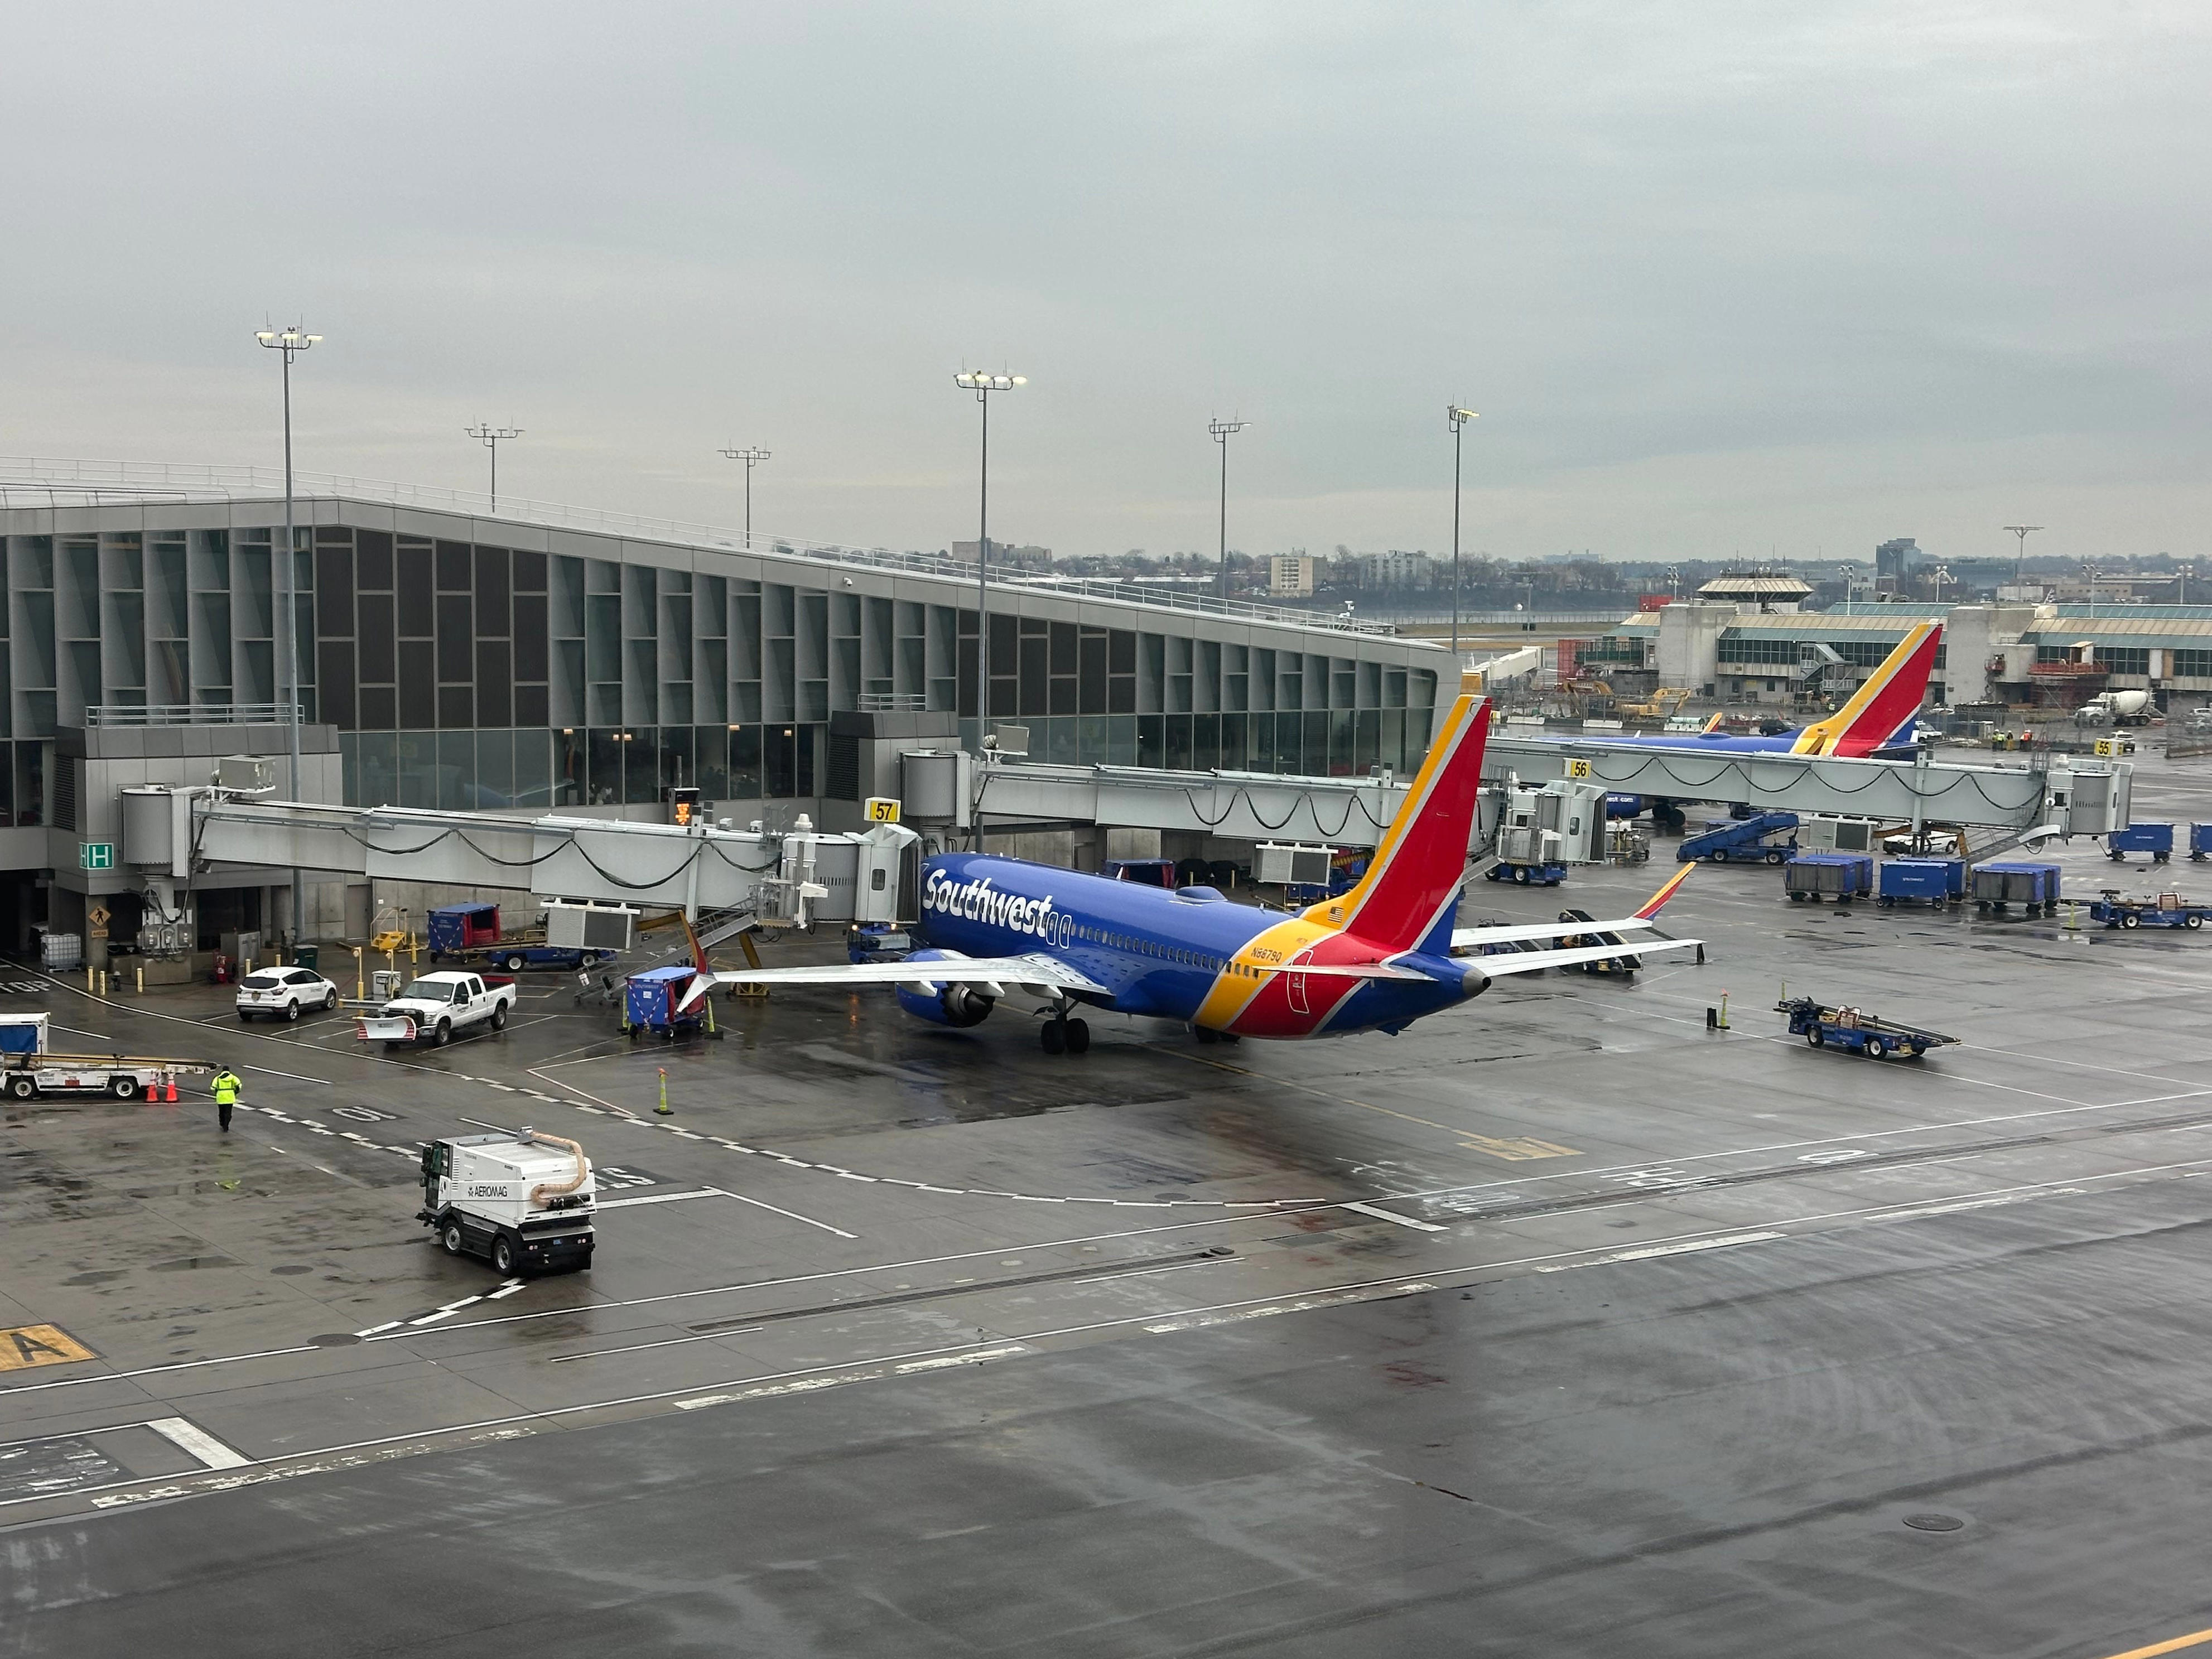 southwest airlines is offering $49 fares, but make sure to read the fine print